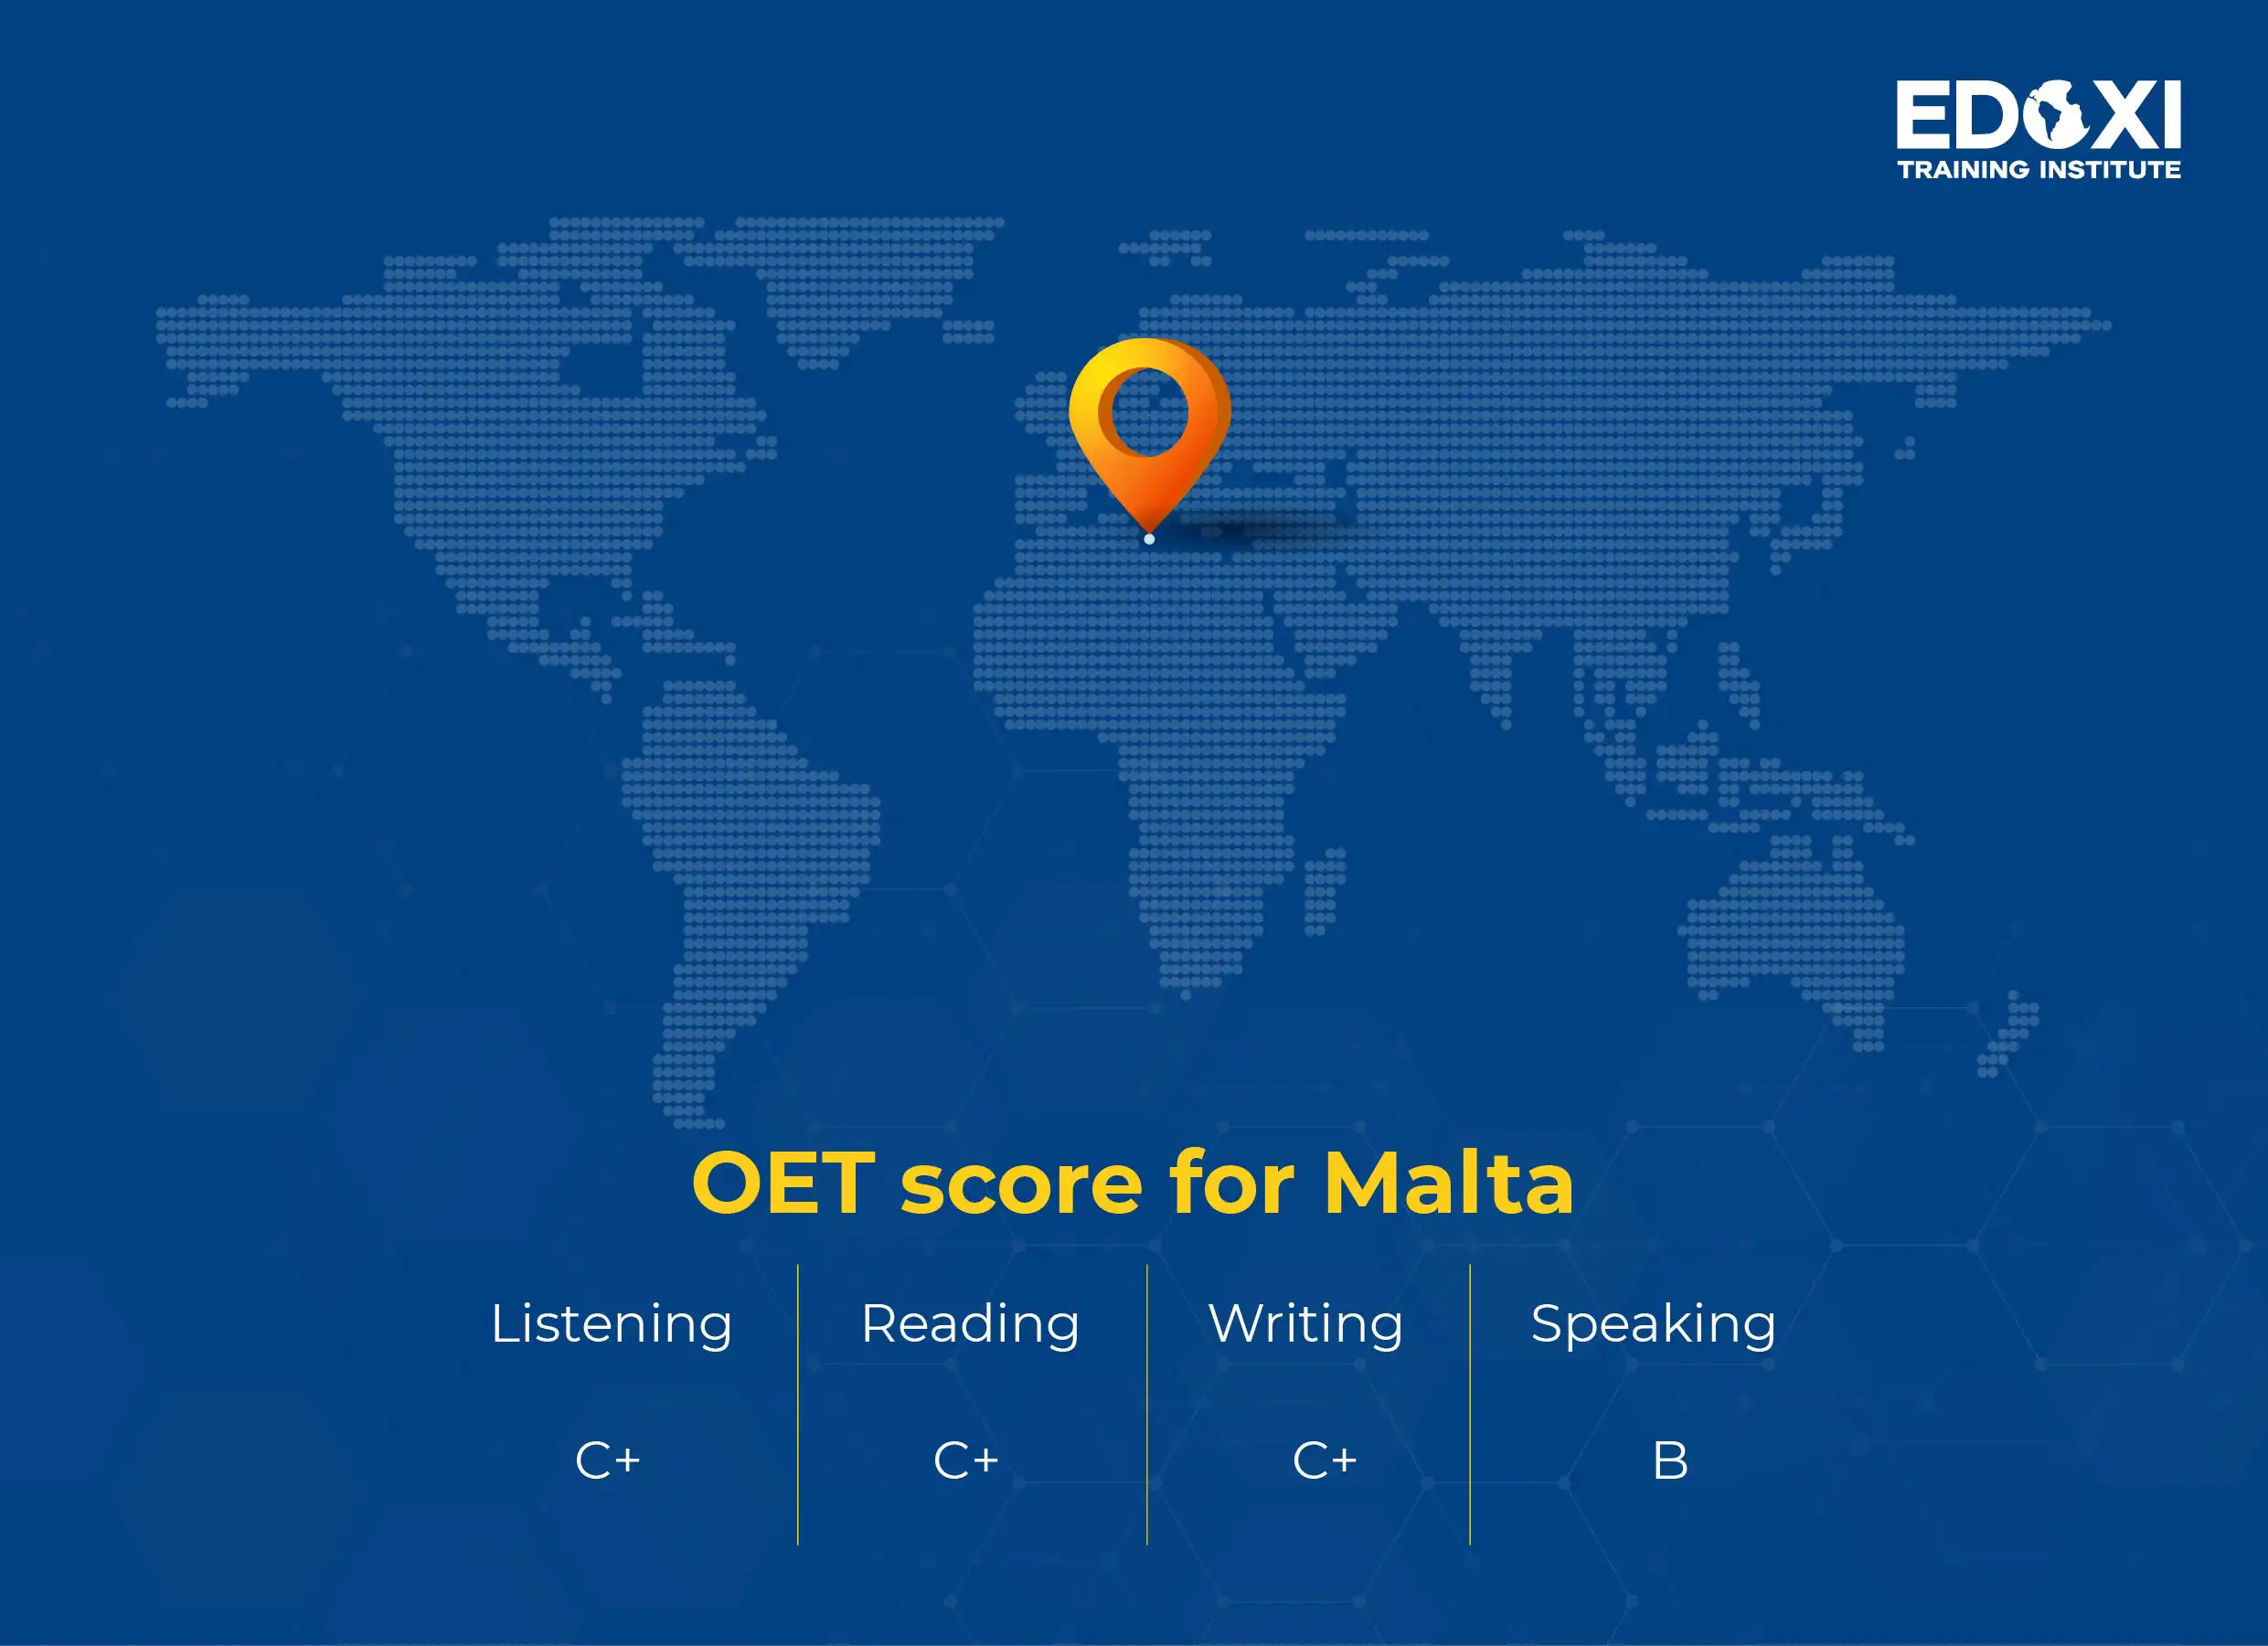 OET score required for the Malta